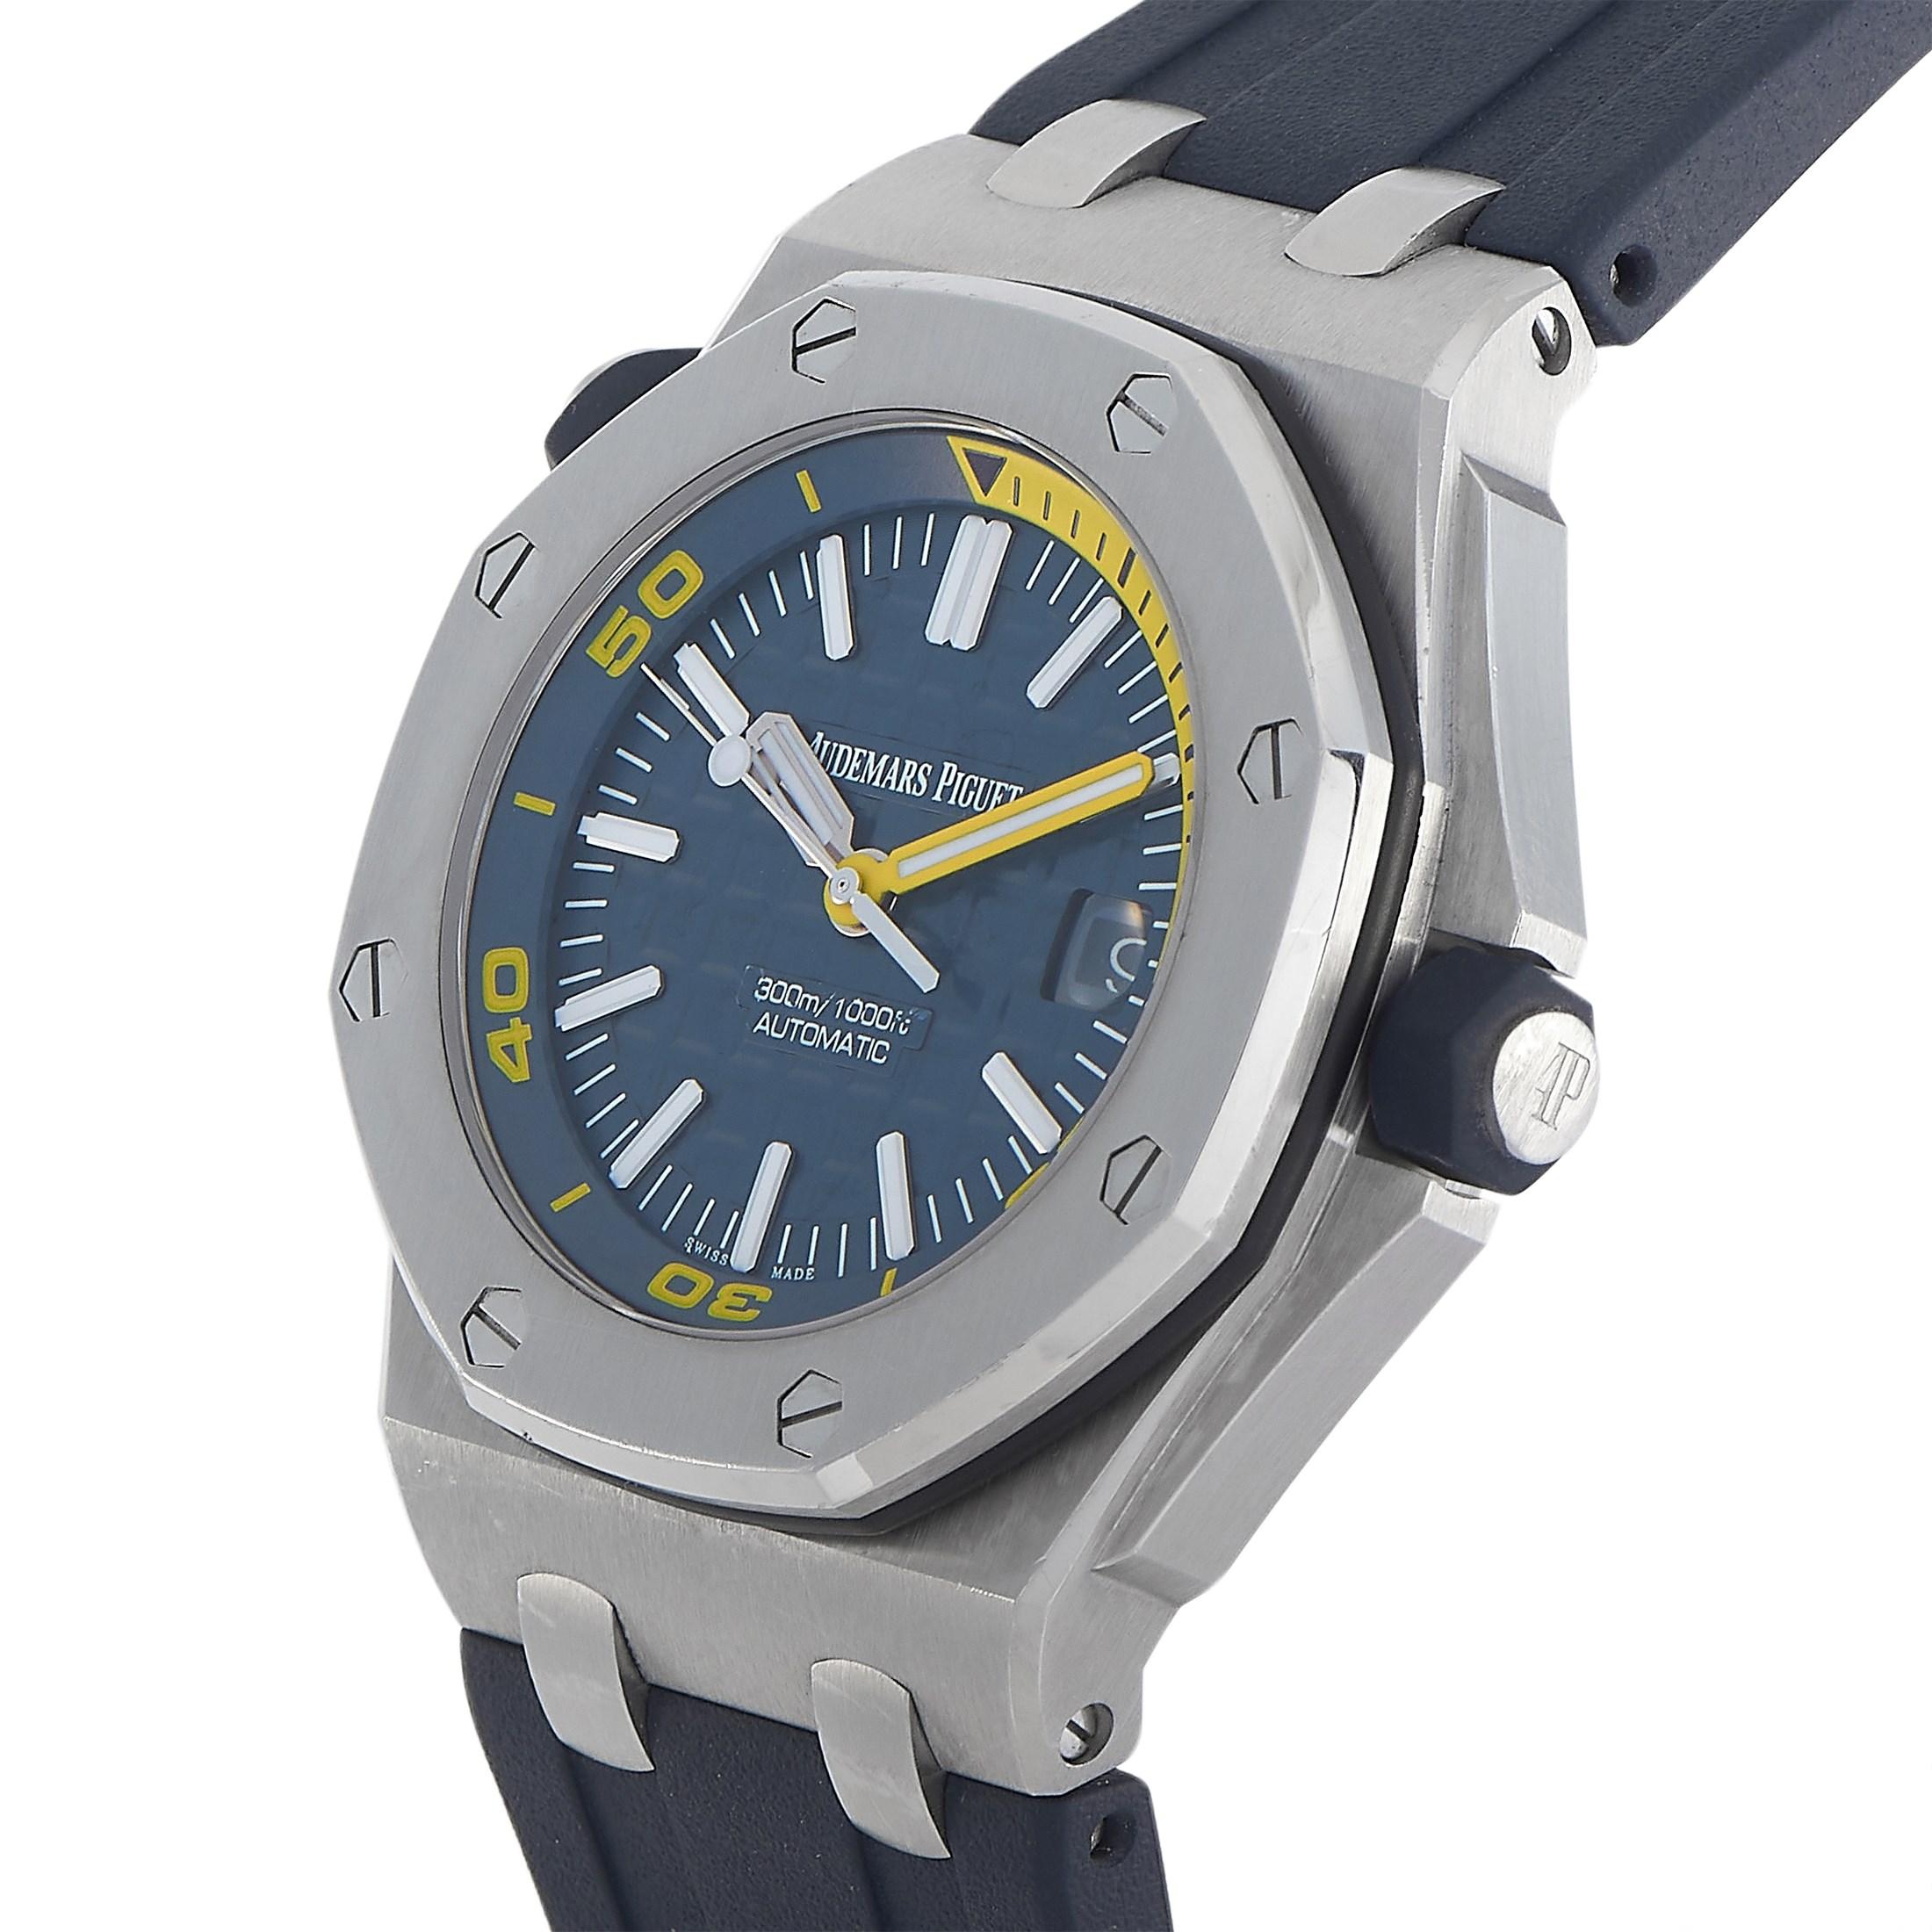 The Audemars Piguet Royal Oak offshore Diver Watch 15710ST.OO.A027CA.01 features a bold visual style. It has a 42mm stainless steel case that is 14.1 mm thick, blue screw-locked crowns clad in rubber, and a rubber strap with stainless steel pin